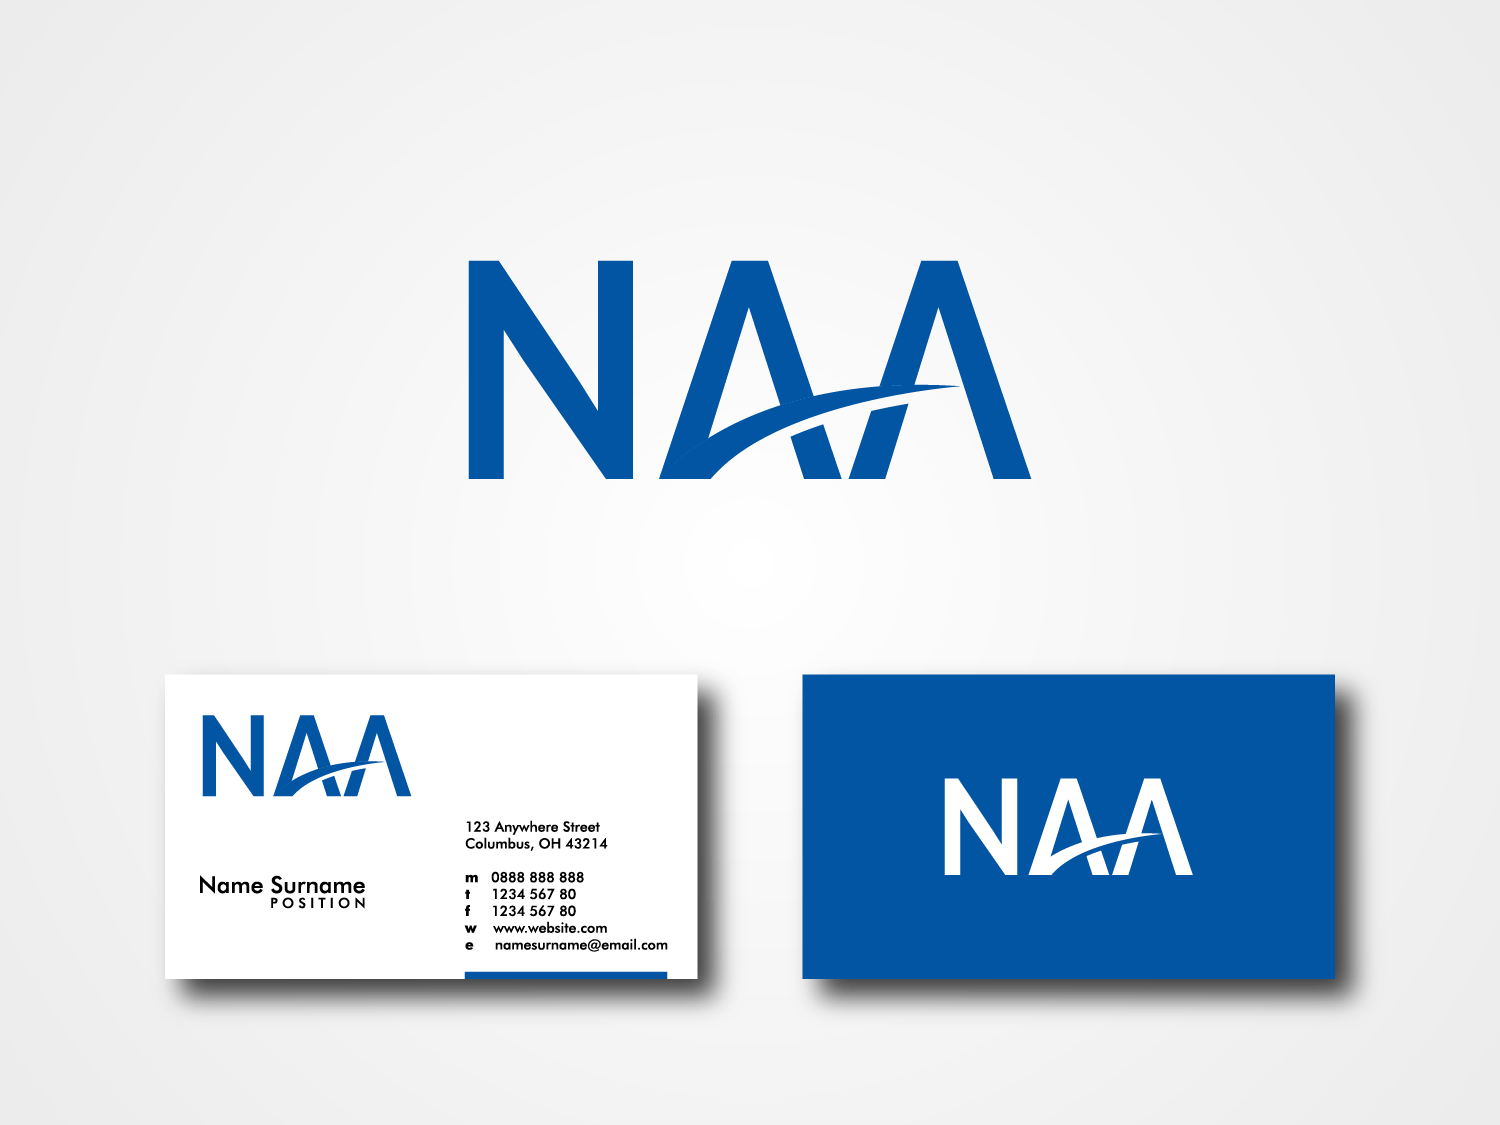 Naa Logo - Professional, Masculine, It Company Logo Design for NATIONAL or NAA ...